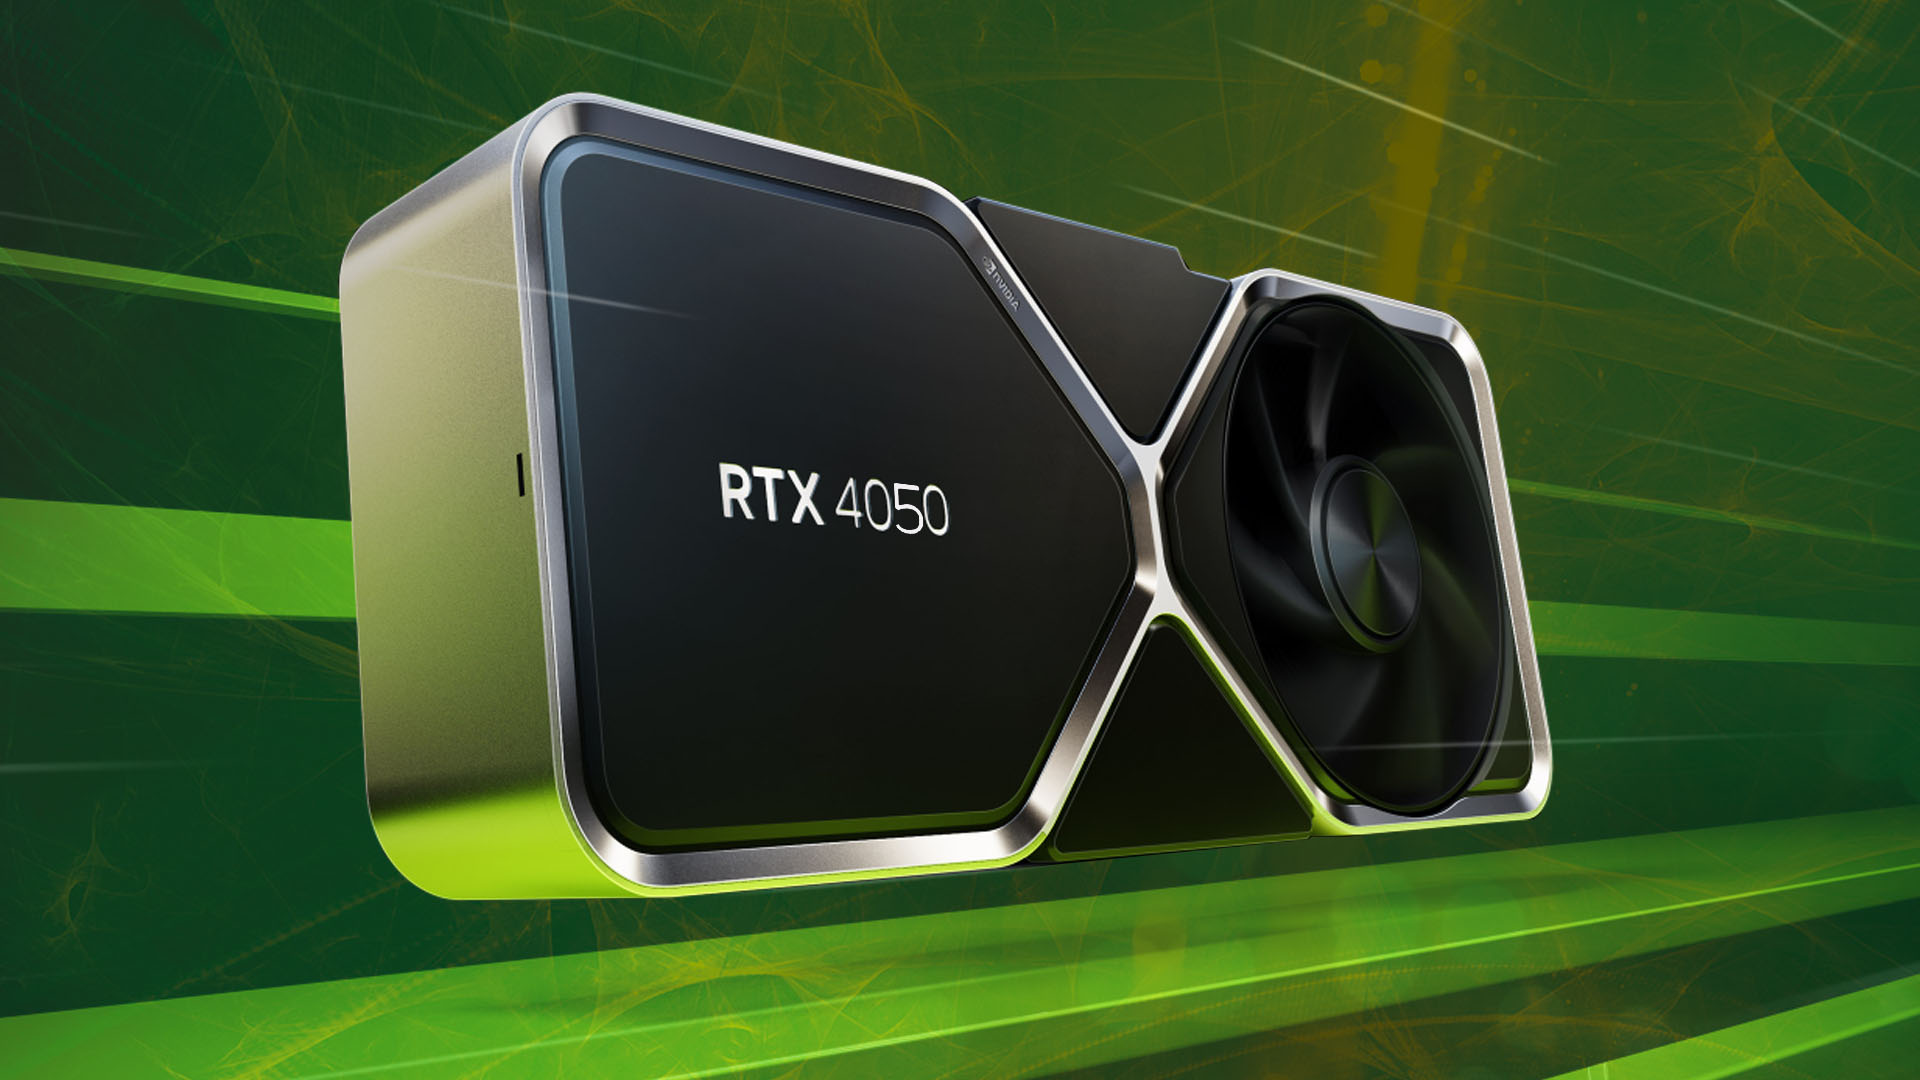 Nvidia GeForce RTX 4050 release date estimate, specs, and latest news